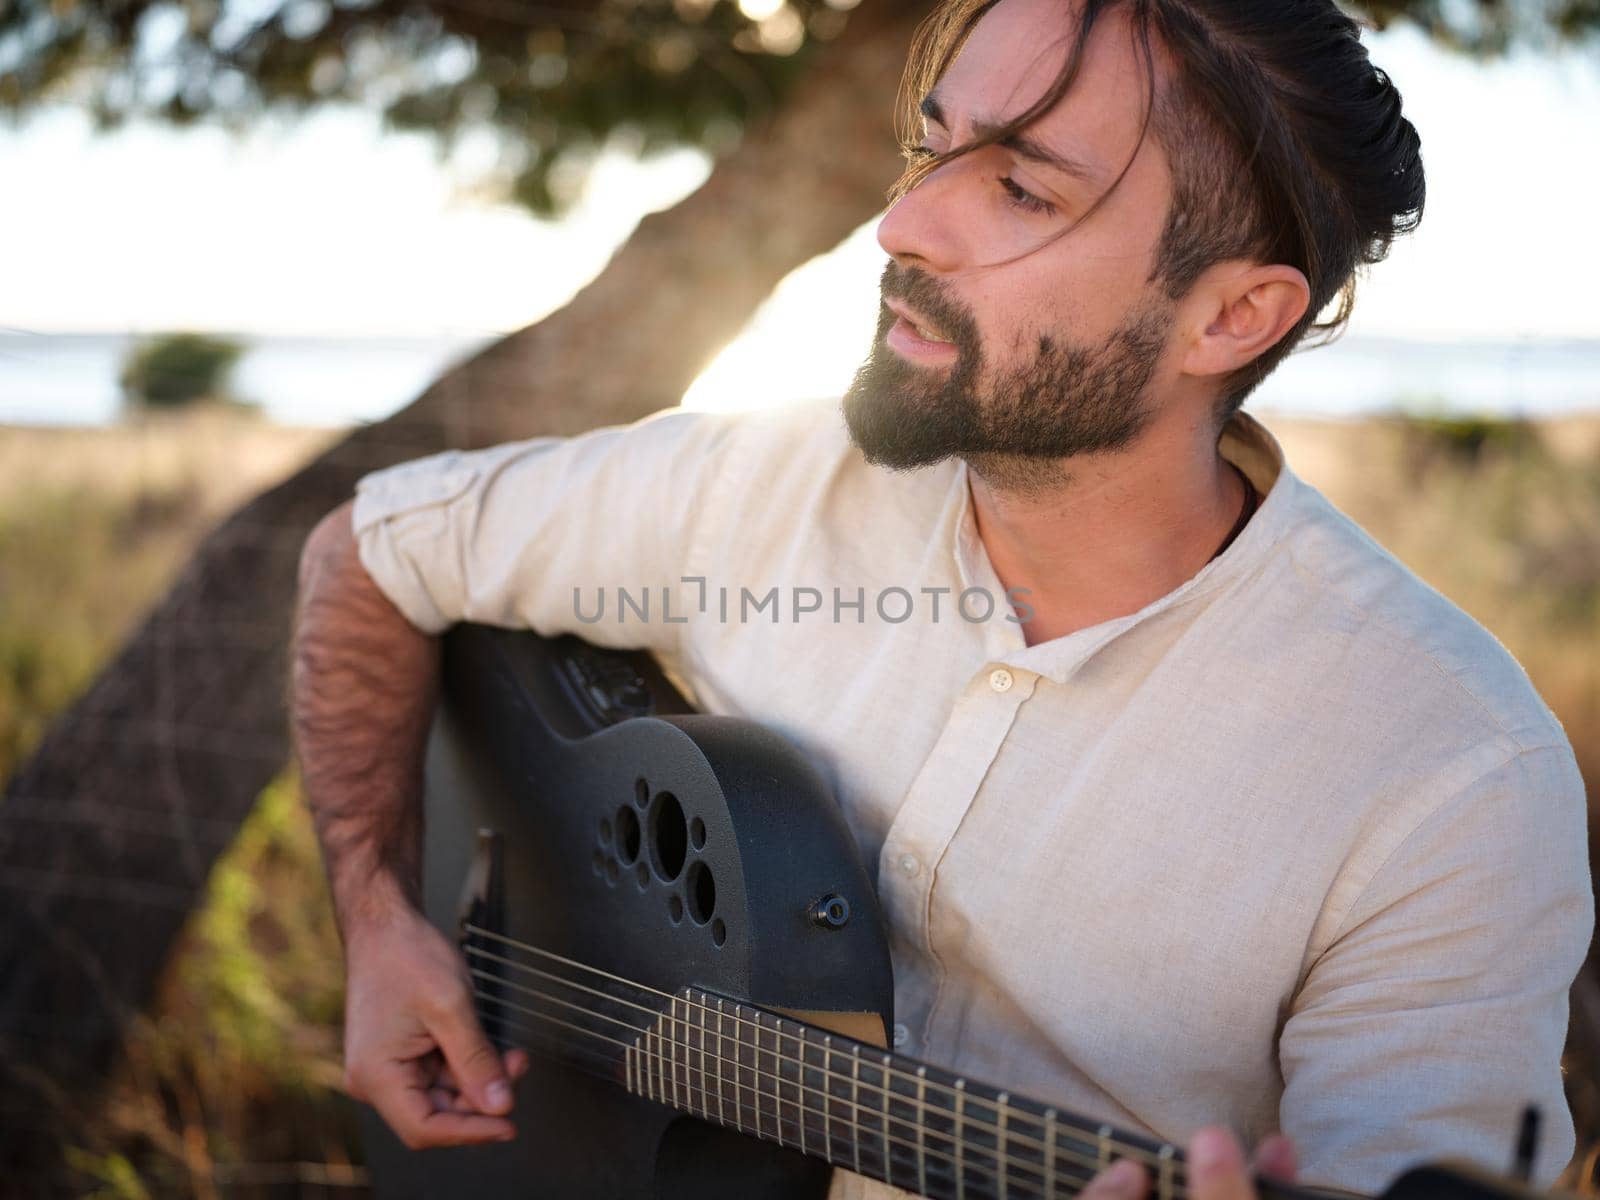 Guitarist in a shirt singing with a grey guitar in the countryside, horizontal close up